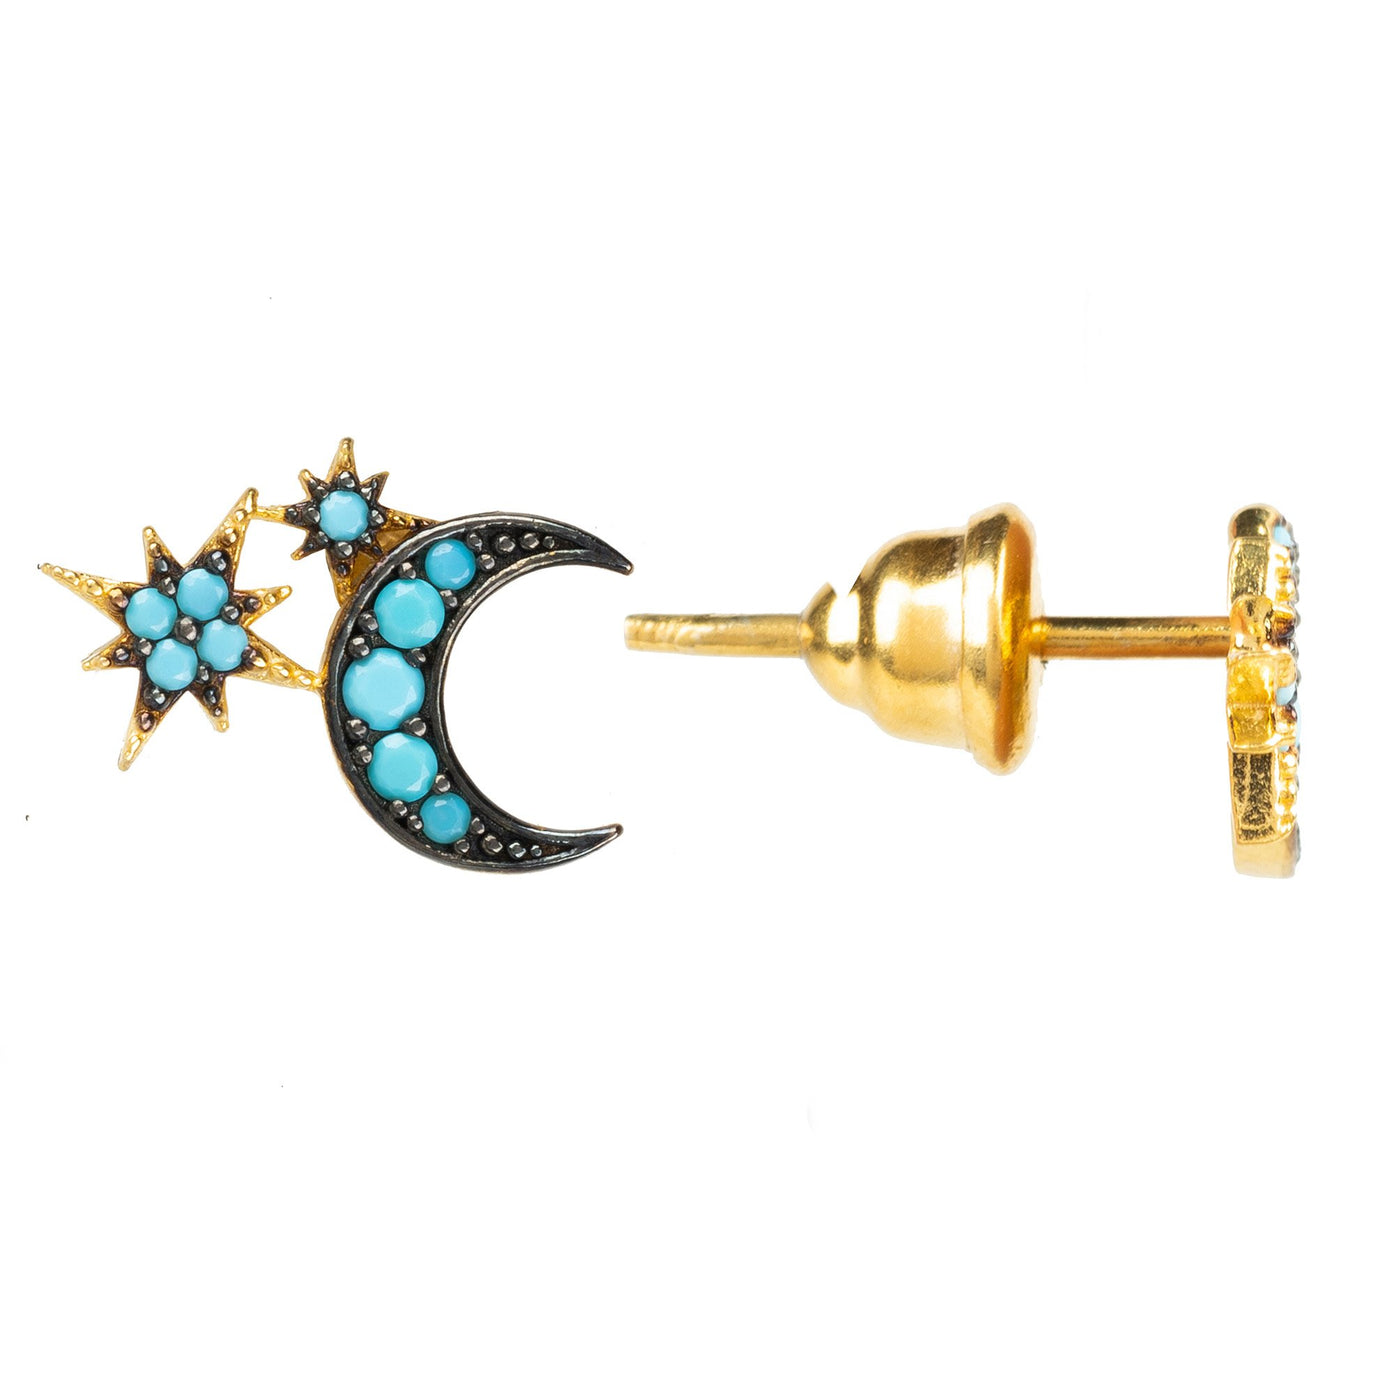 Stud earrings - moon and stars - 22 carat gold plated - Turquoise